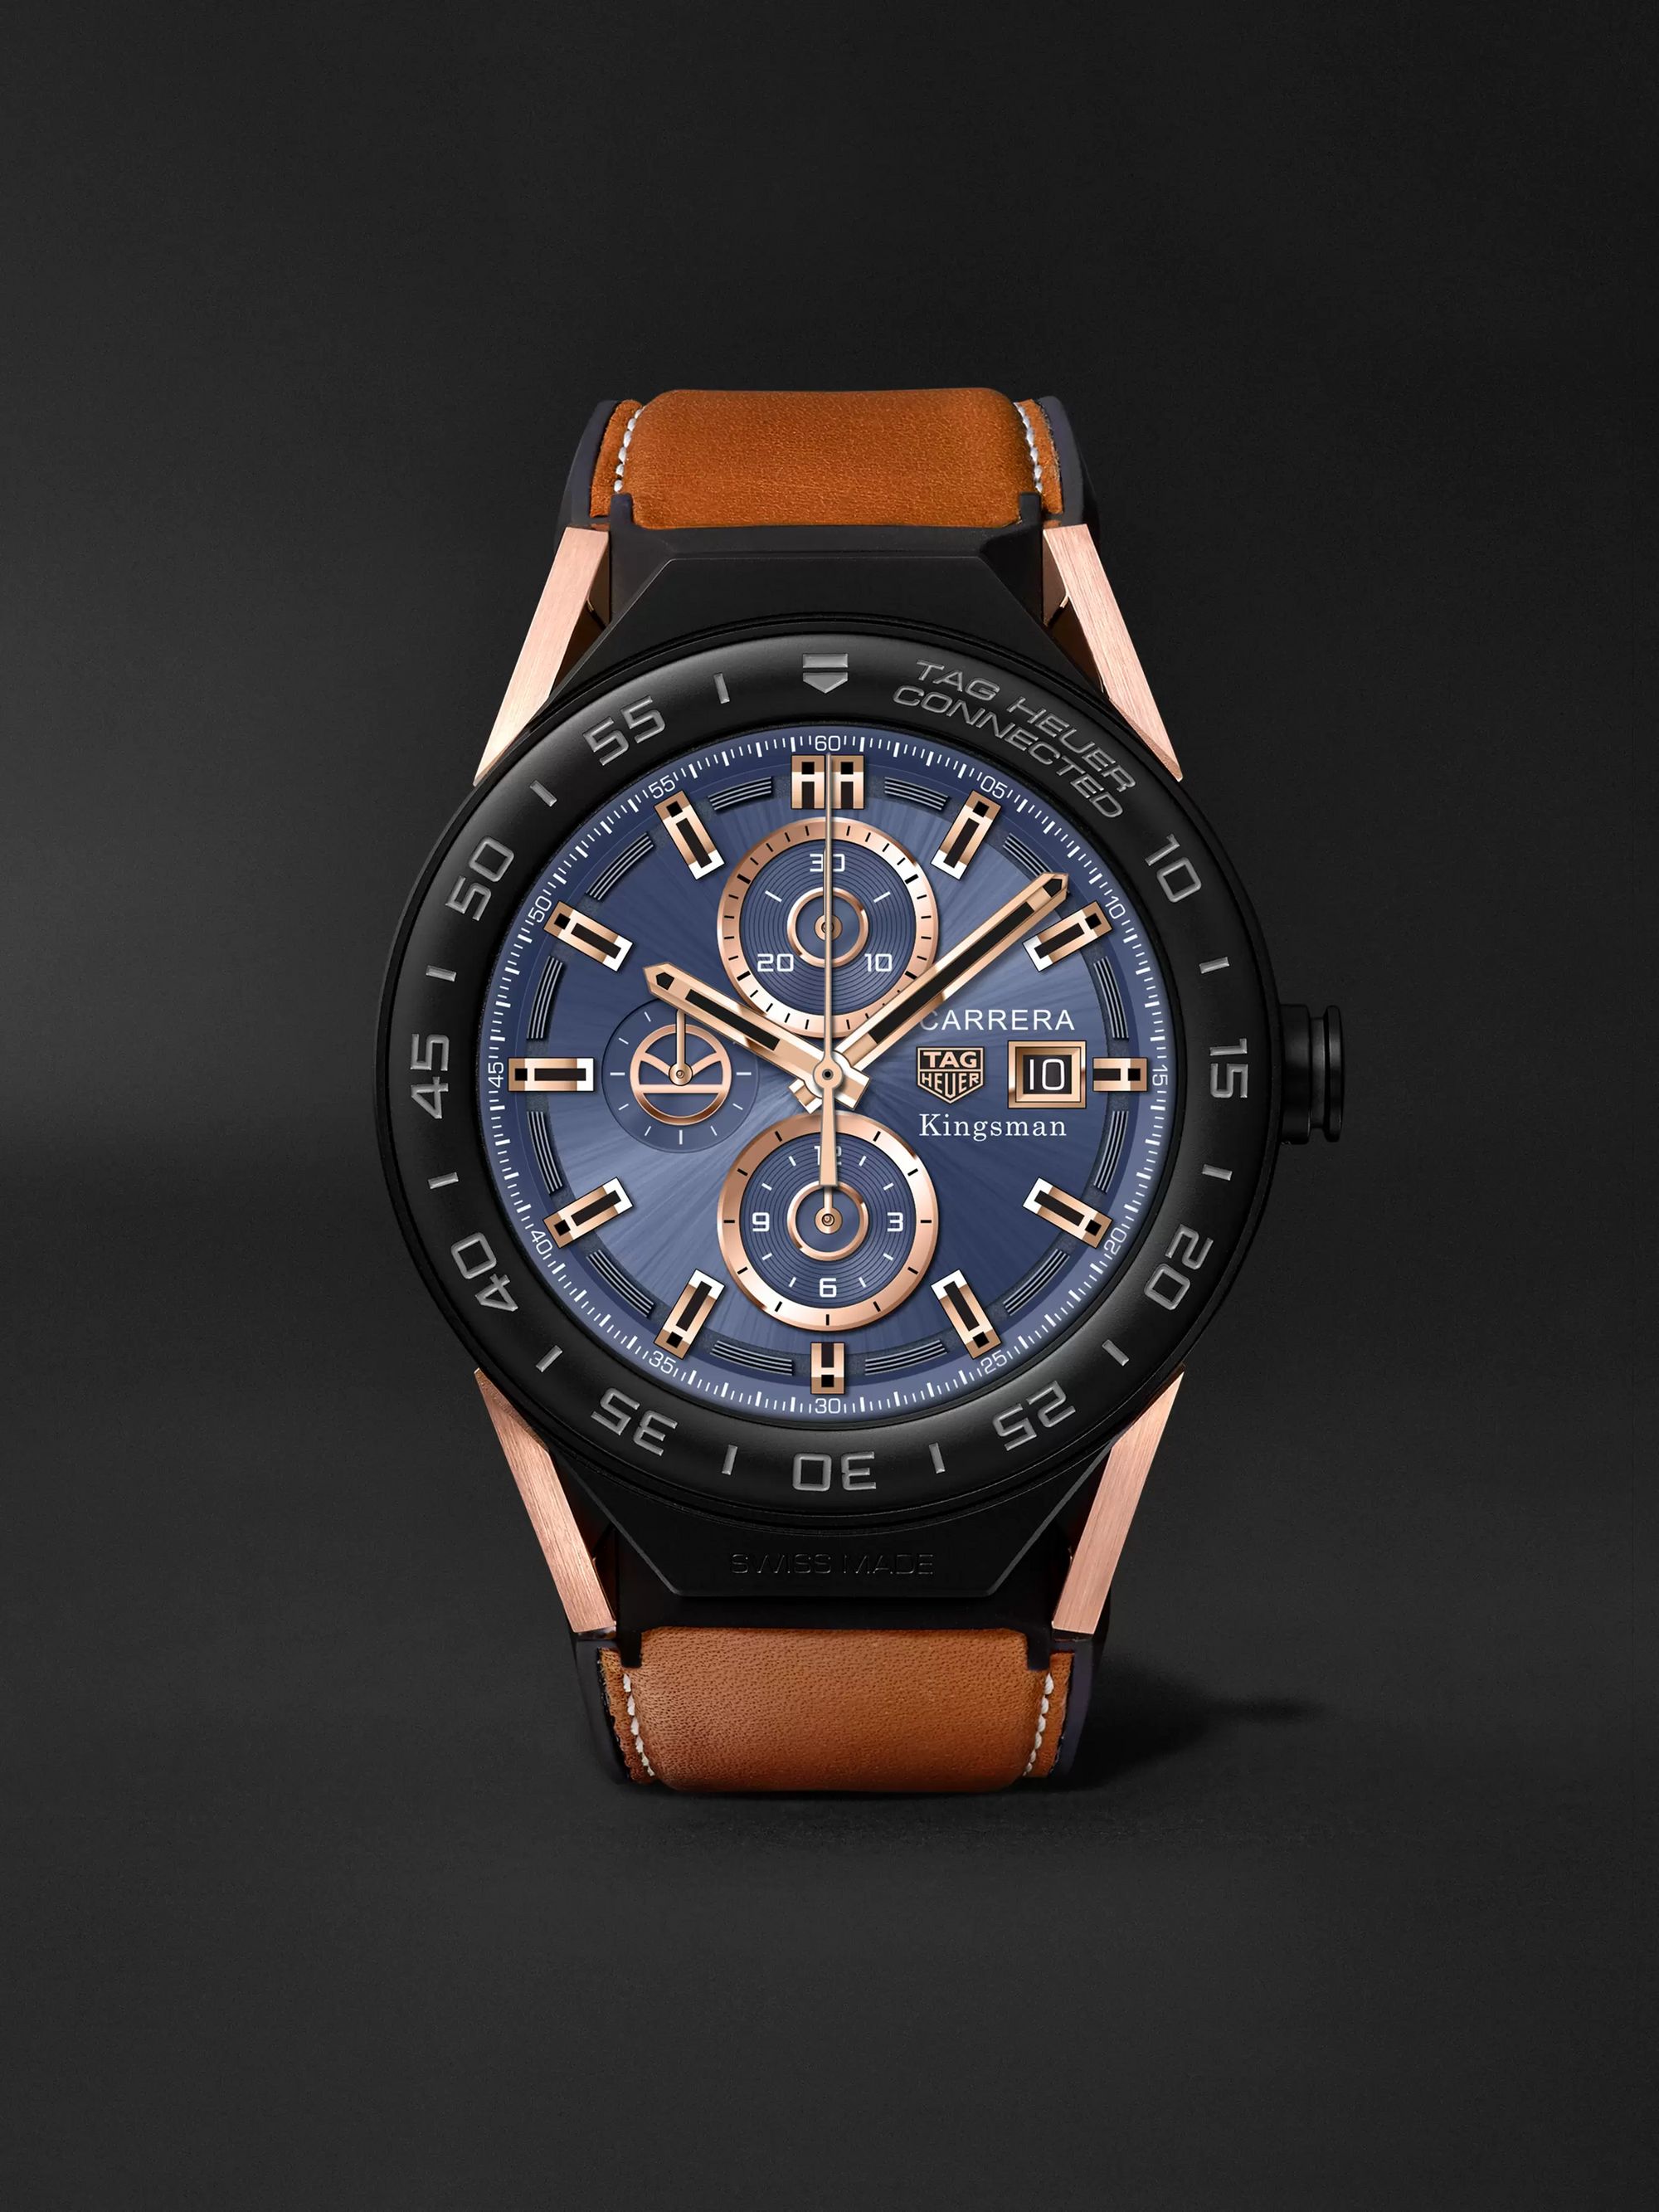 TAG Heuer Connected Modular 45: Your Swiss-Made luxury smartwatch